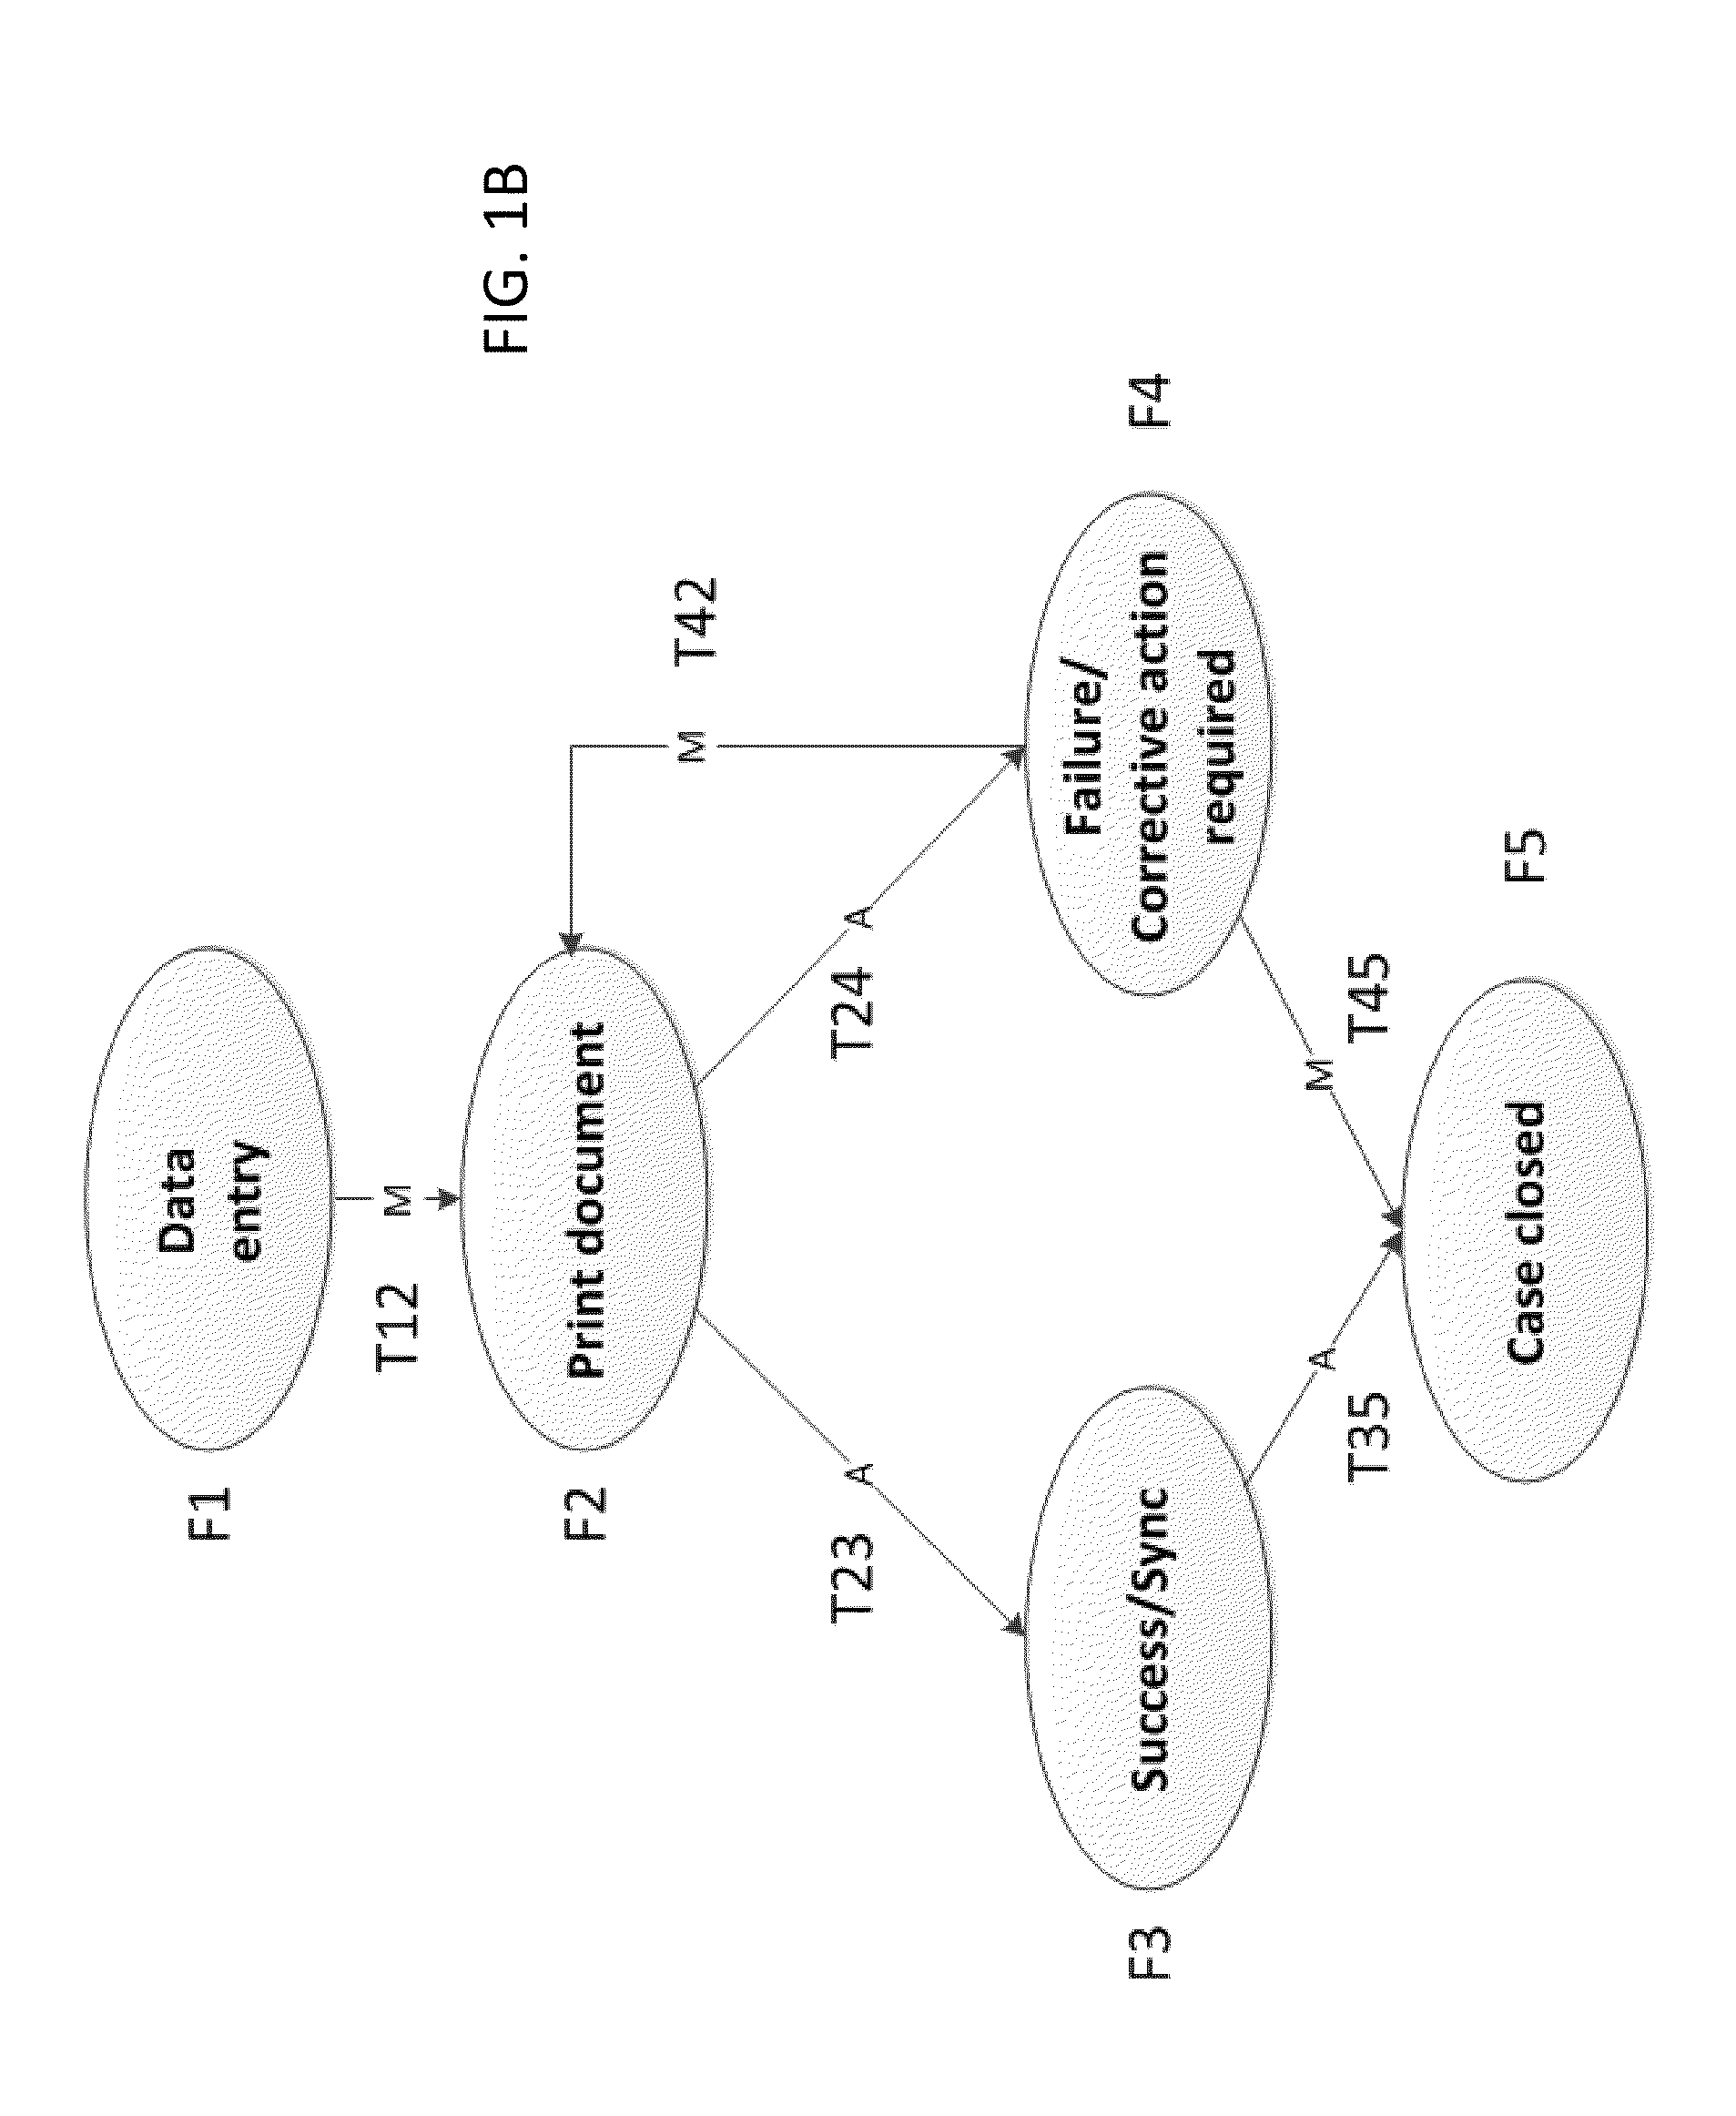 Method of developing an application for execution in a workflow management system and apparatus to assist with generation of an application for execution in a workflow management system